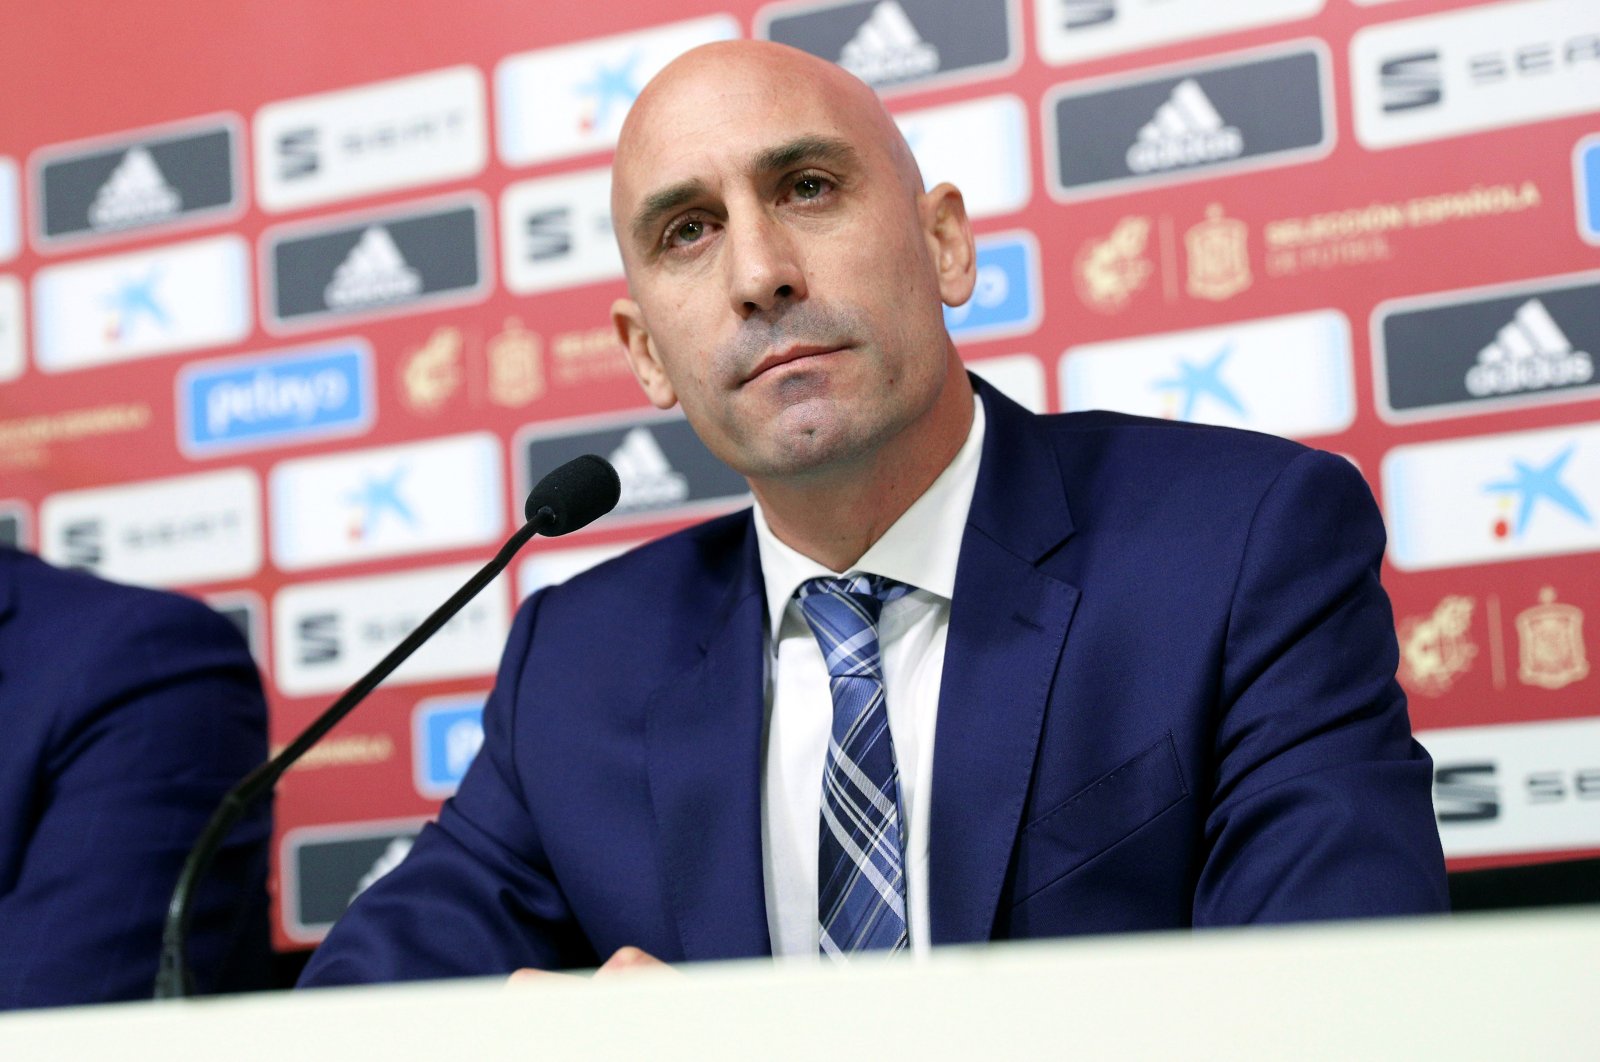 FIFA bans Spanish football chief Rubiales for 90 days over kiss | Daily ...